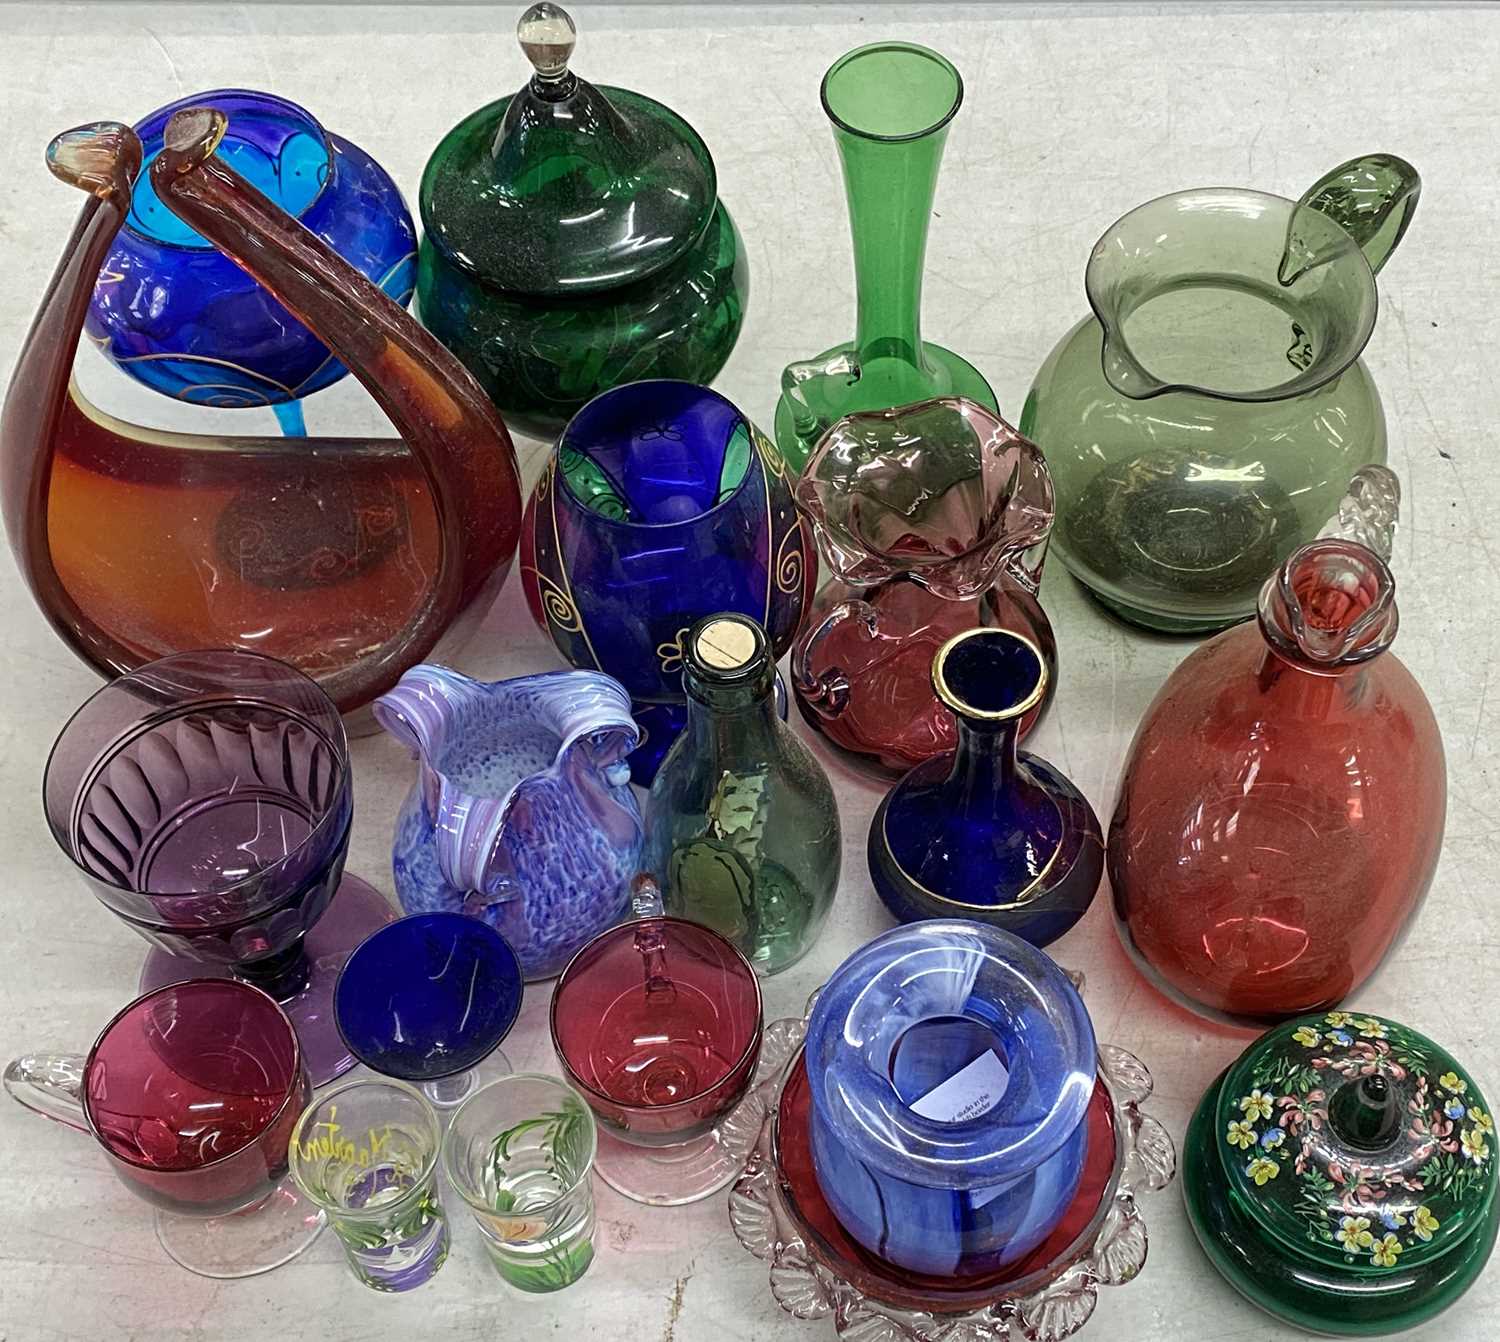 QUANTITY OF CUT GLASSWARE & COLOURED GLASSWARE including decanters, bowls, vases, and other - Image 2 of 4